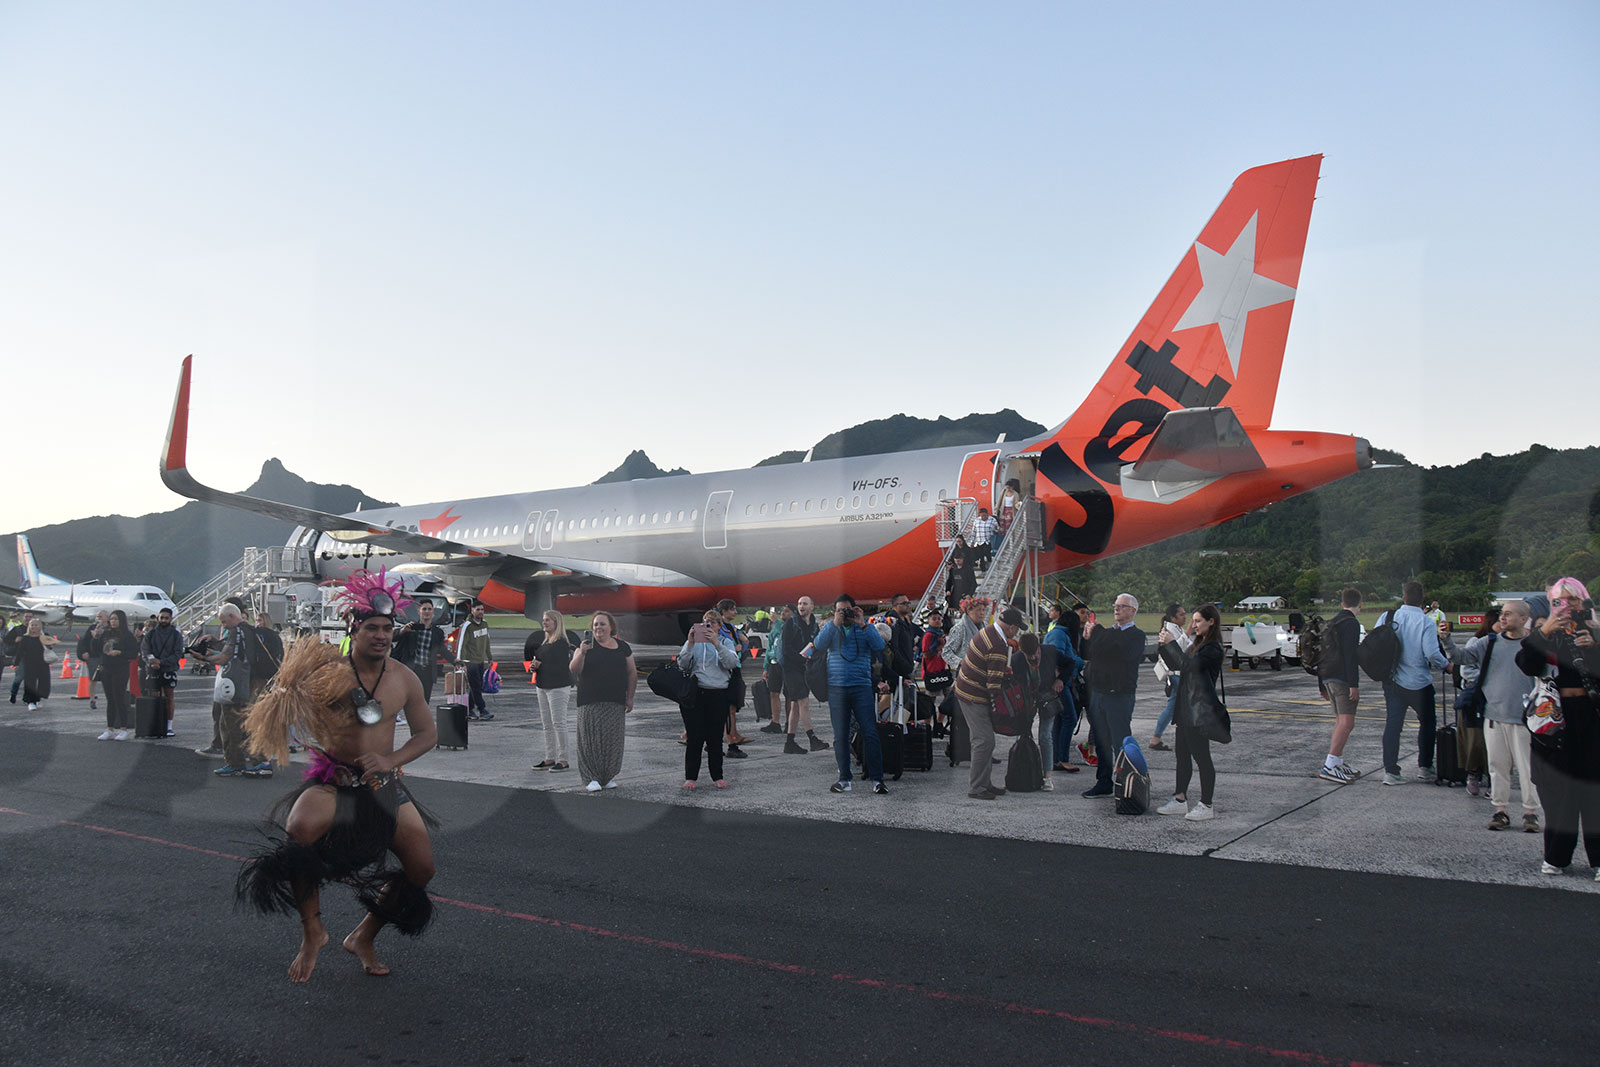 Jetstar launches new route to strengthen tourism and connectivity